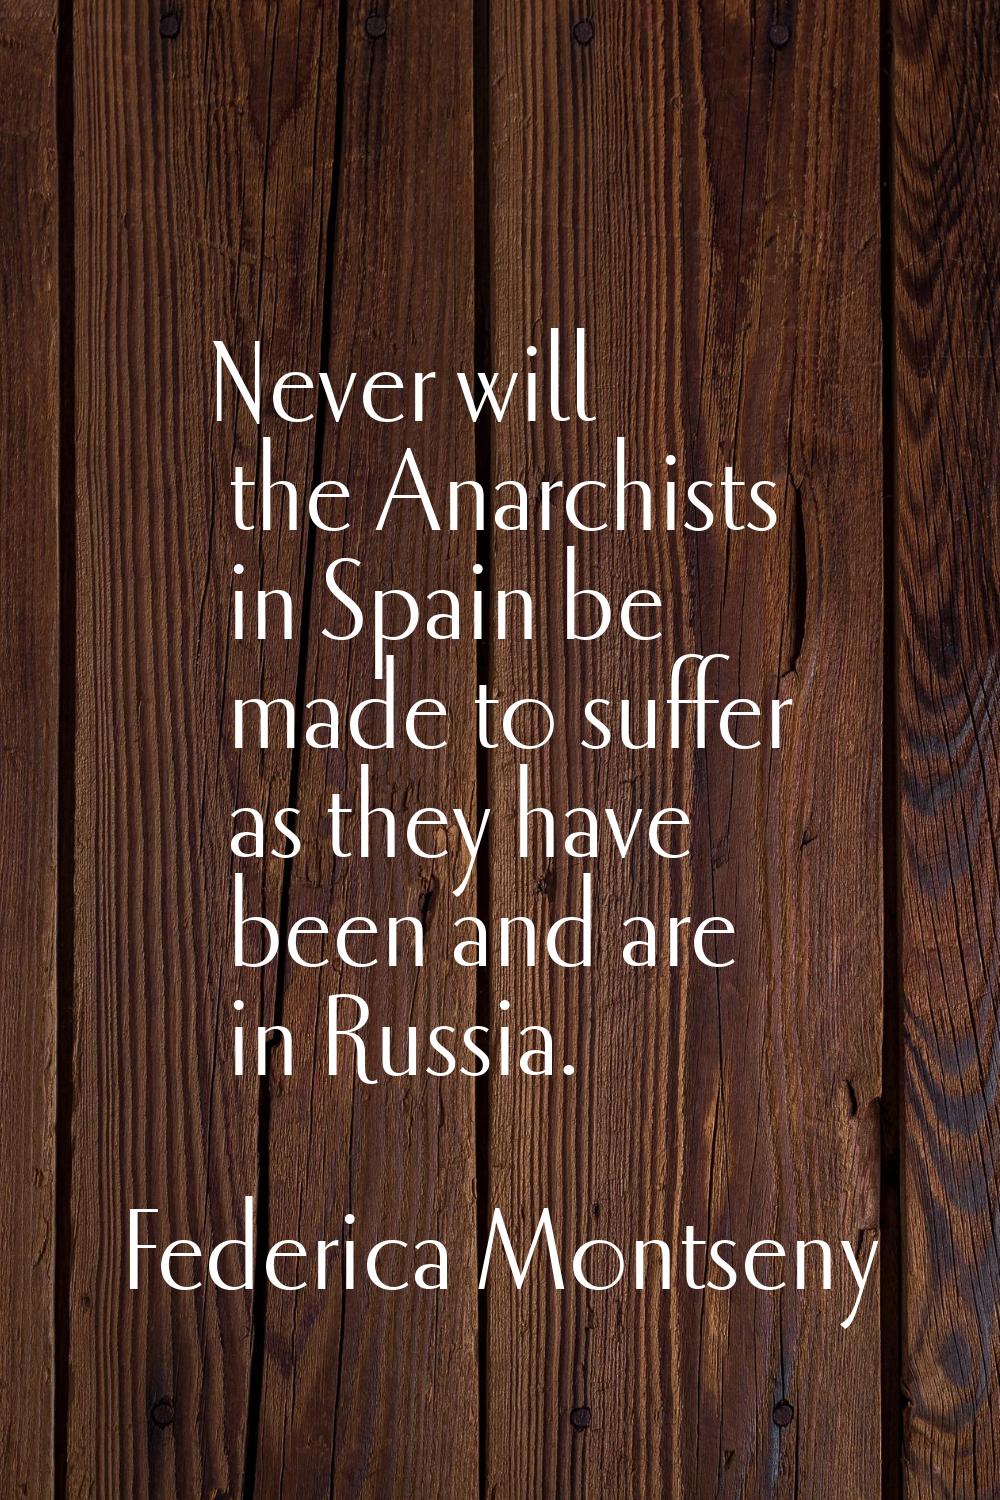 Never will the Anarchists in Spain be made to suffer as they have been and are in Russia.